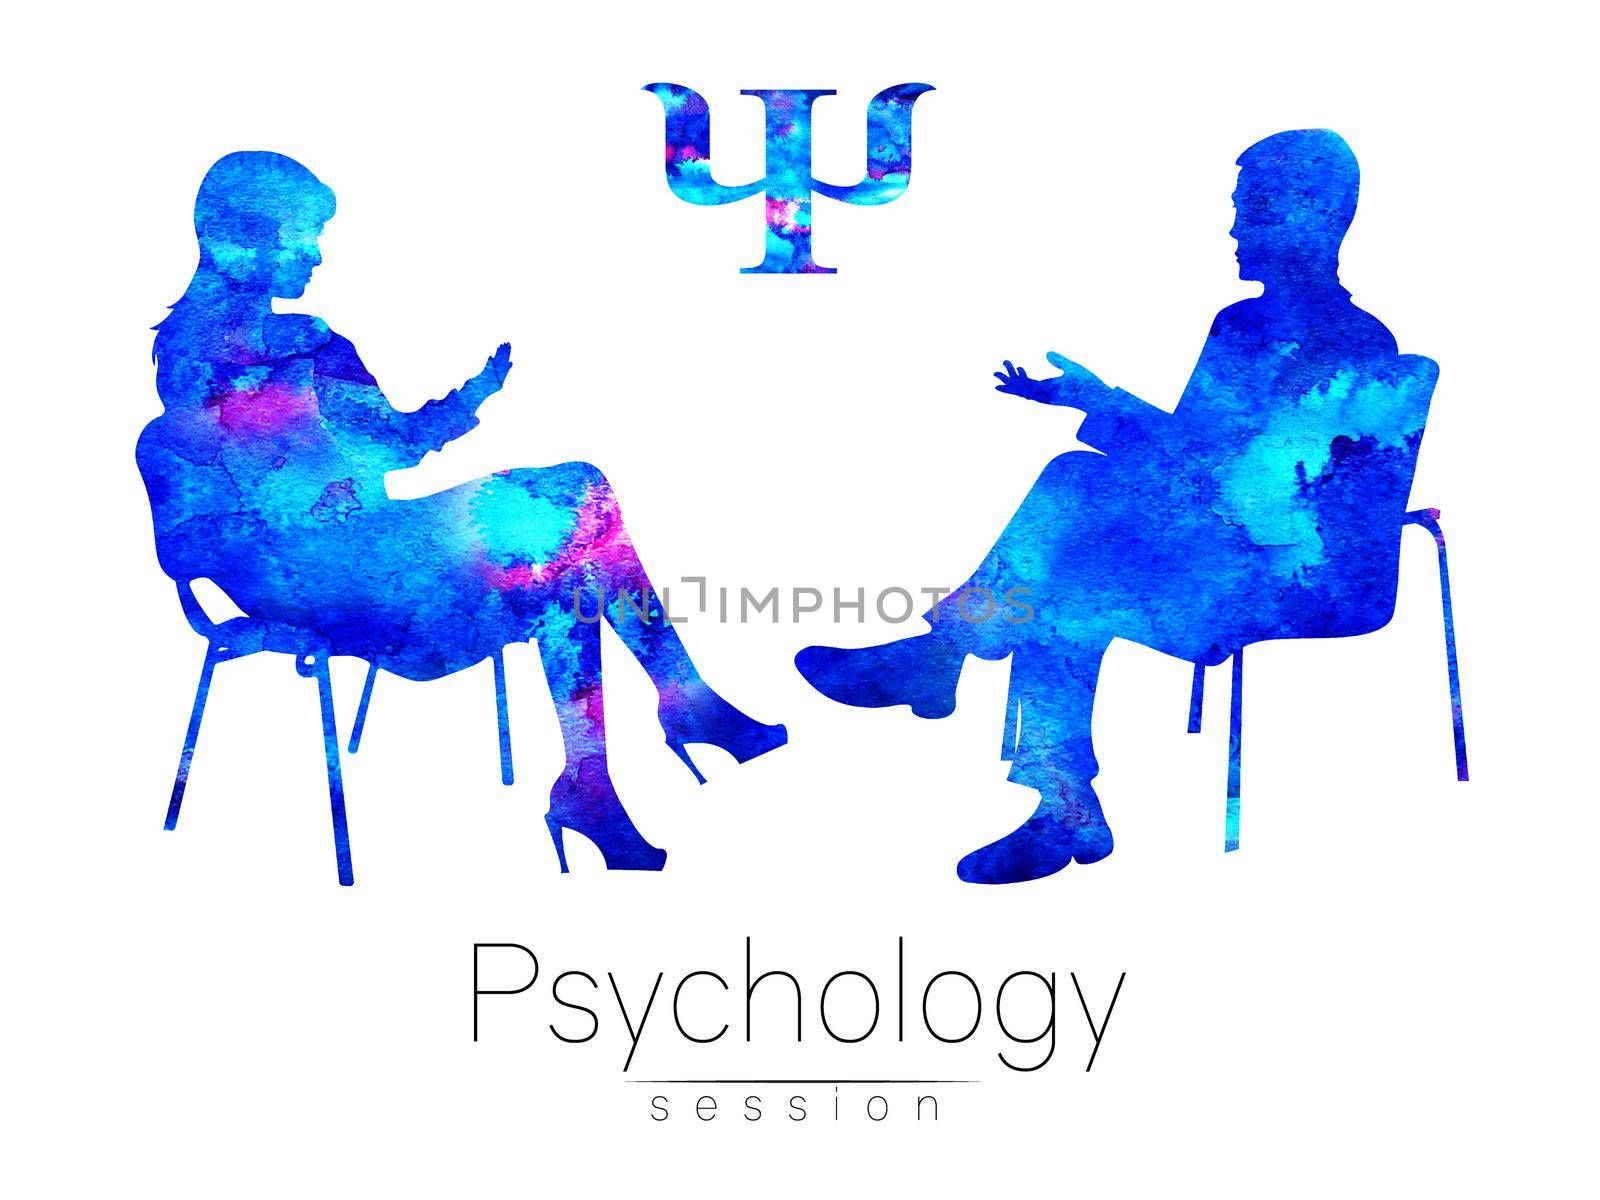 The psychologist and the client. Psychotherapy. Psycho therapeutic session. Psychological counseling. Man woman talking while sitting. Silhouette. Blue profile. Modern symbol logo. Design concept.Sign by DesignAB